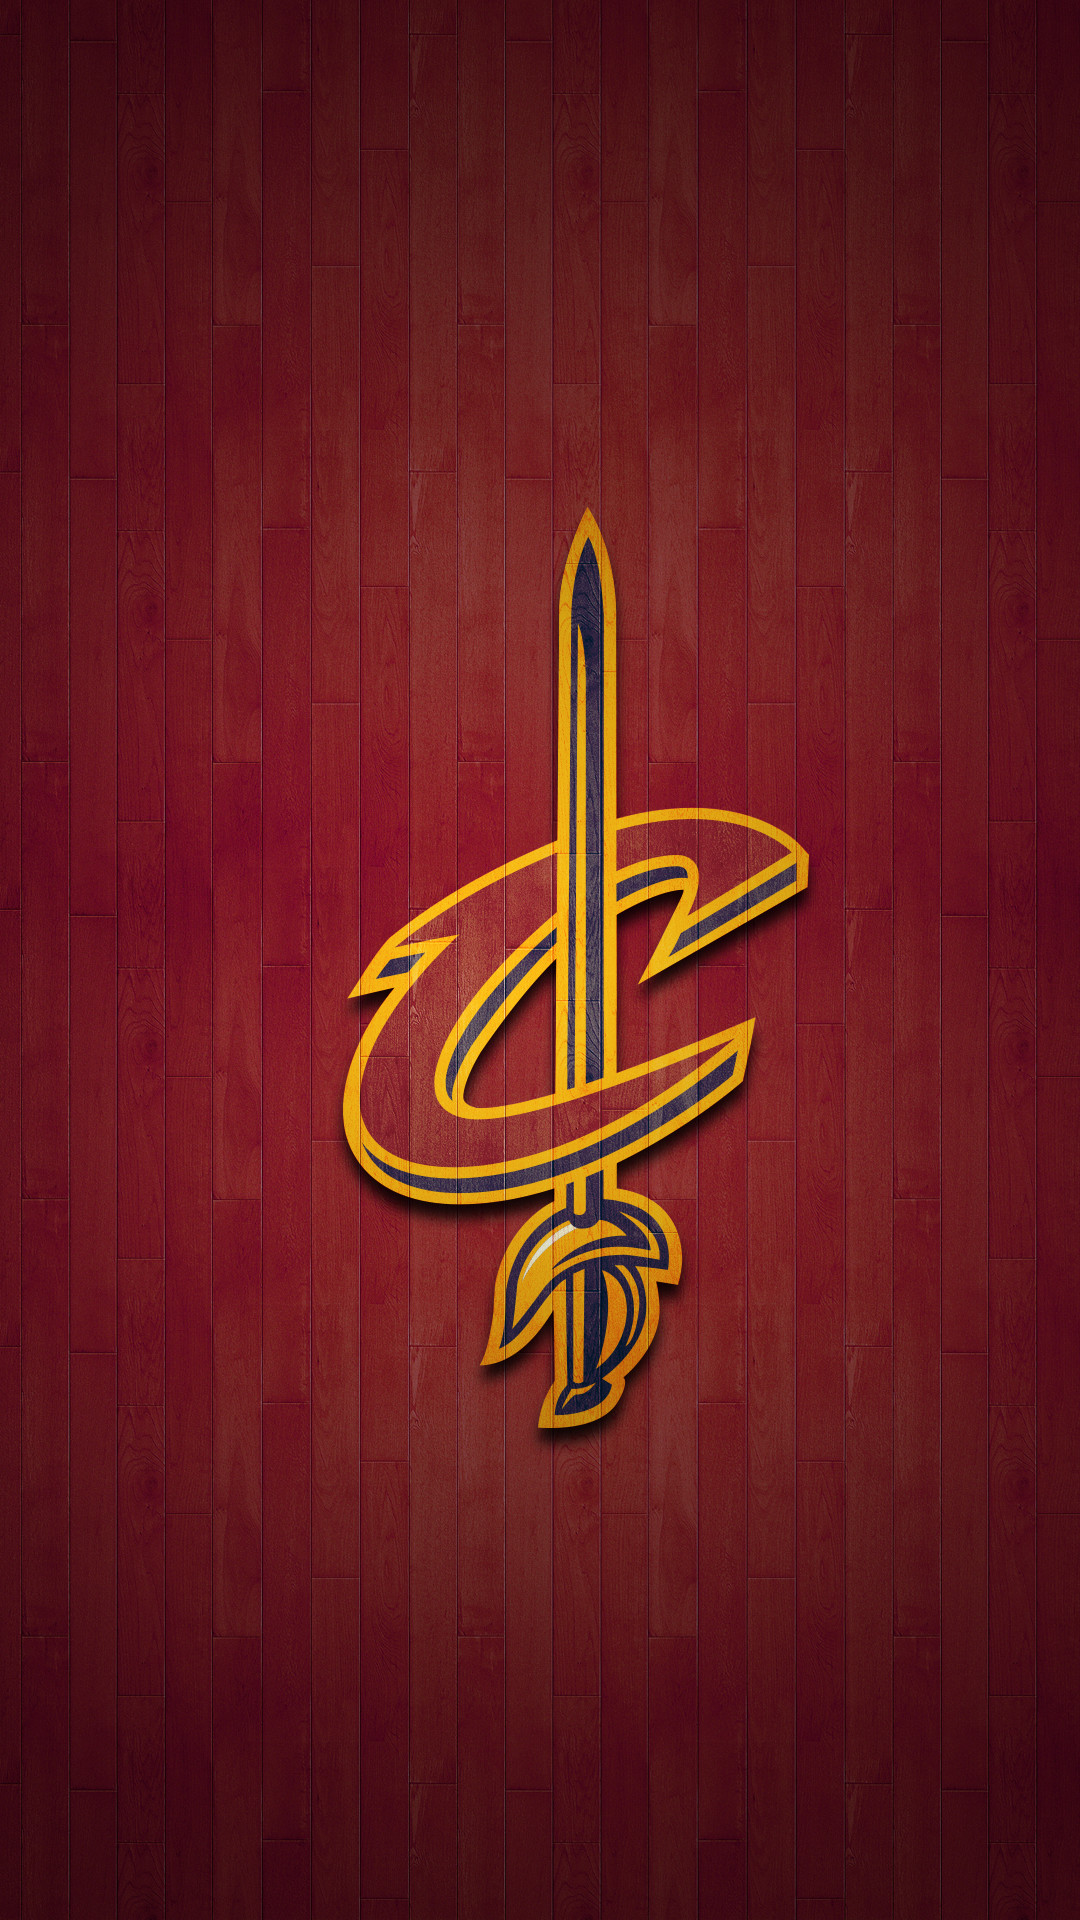 1080x1920 Photos For Cleveland Cavaliers Nba Wallpaper Hd Pics Mobile Phones .